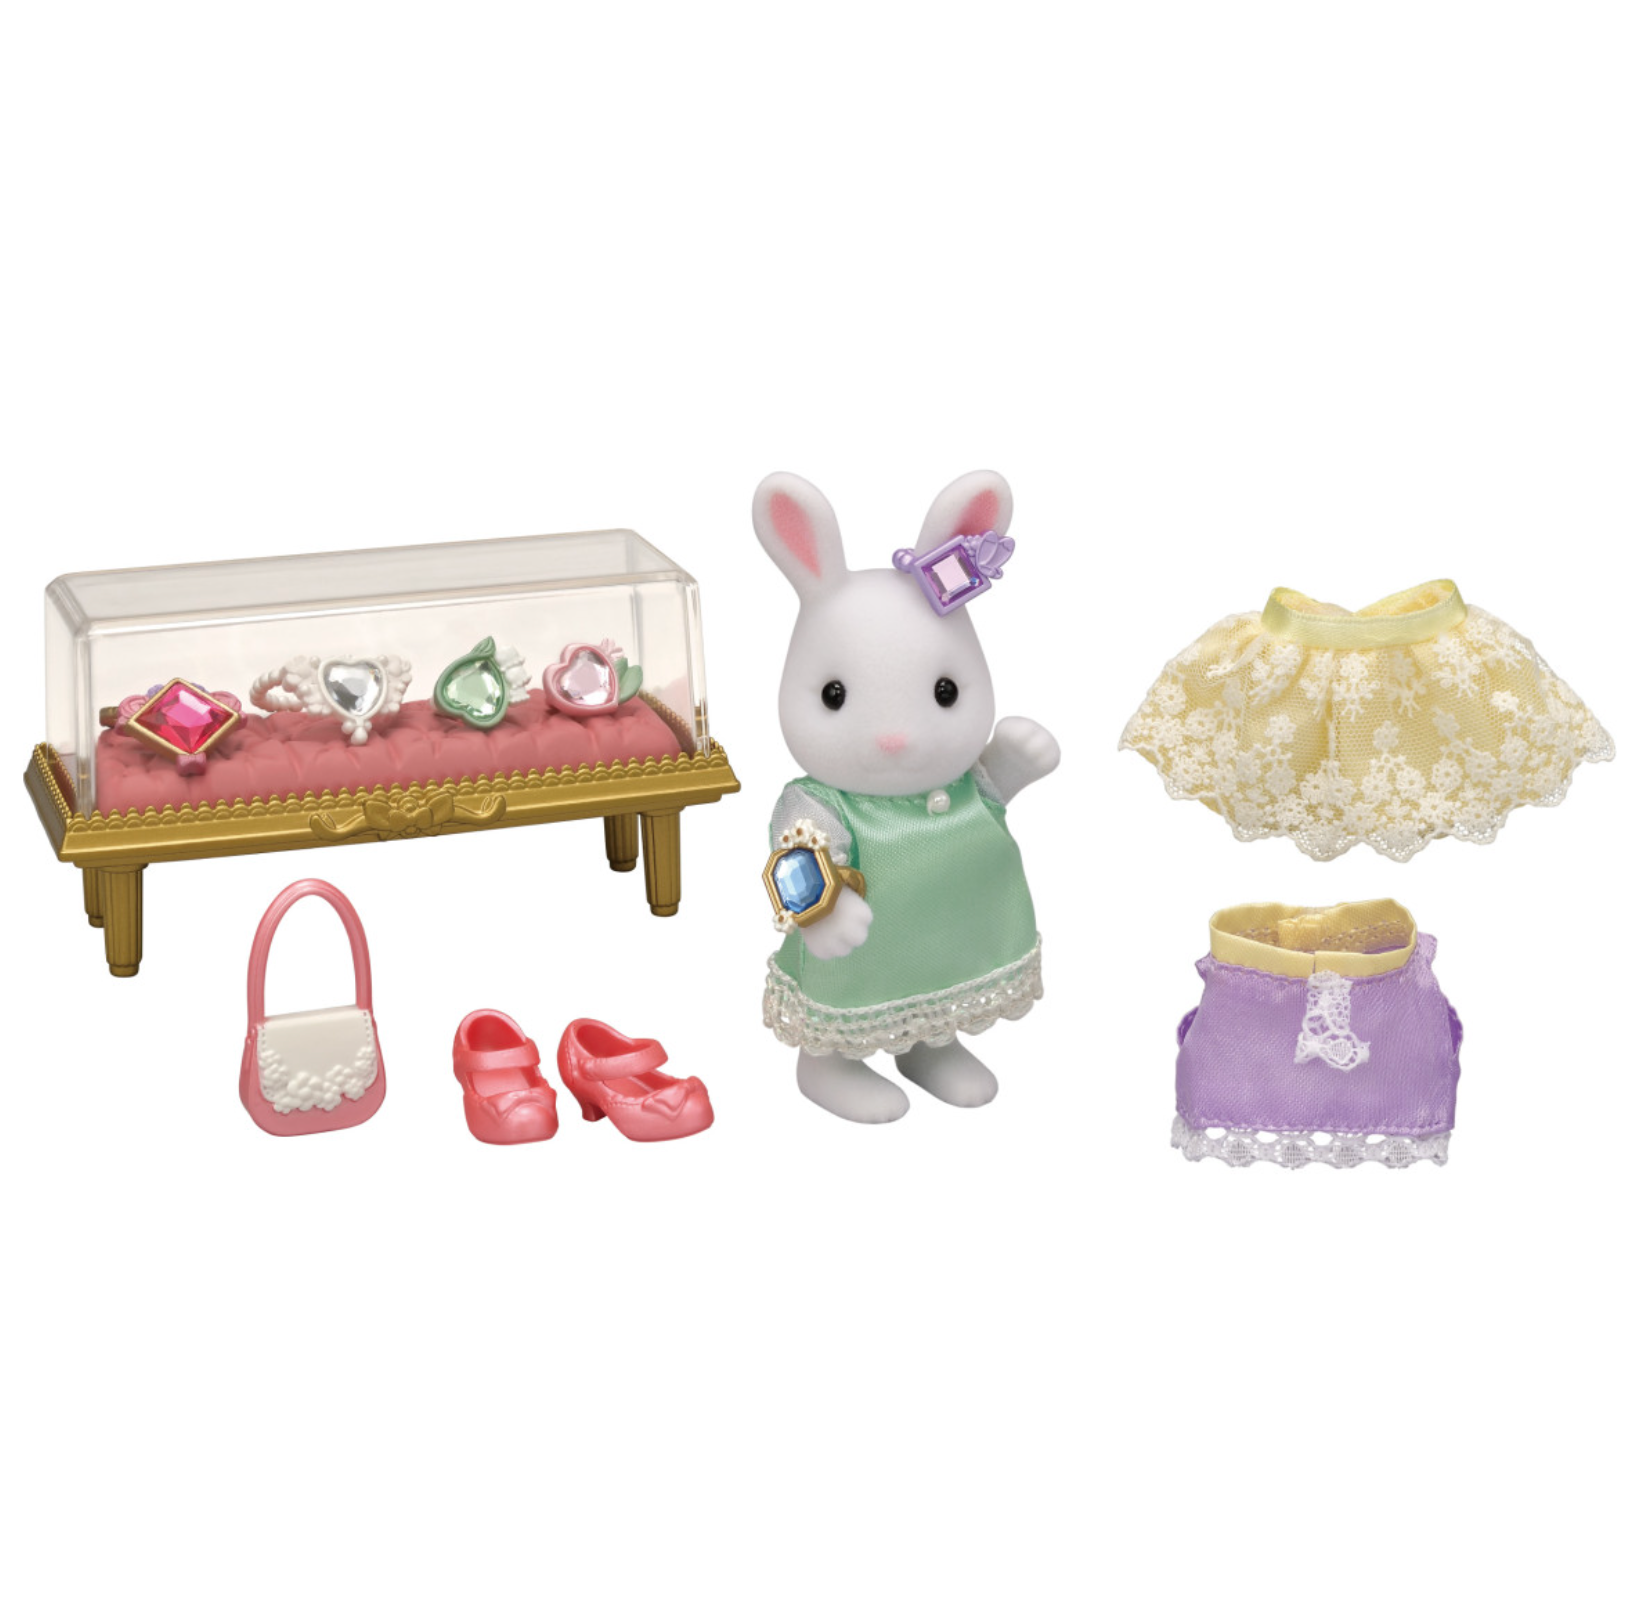 Calico Critters Fashion Play Set -Jewels & Gems Collection